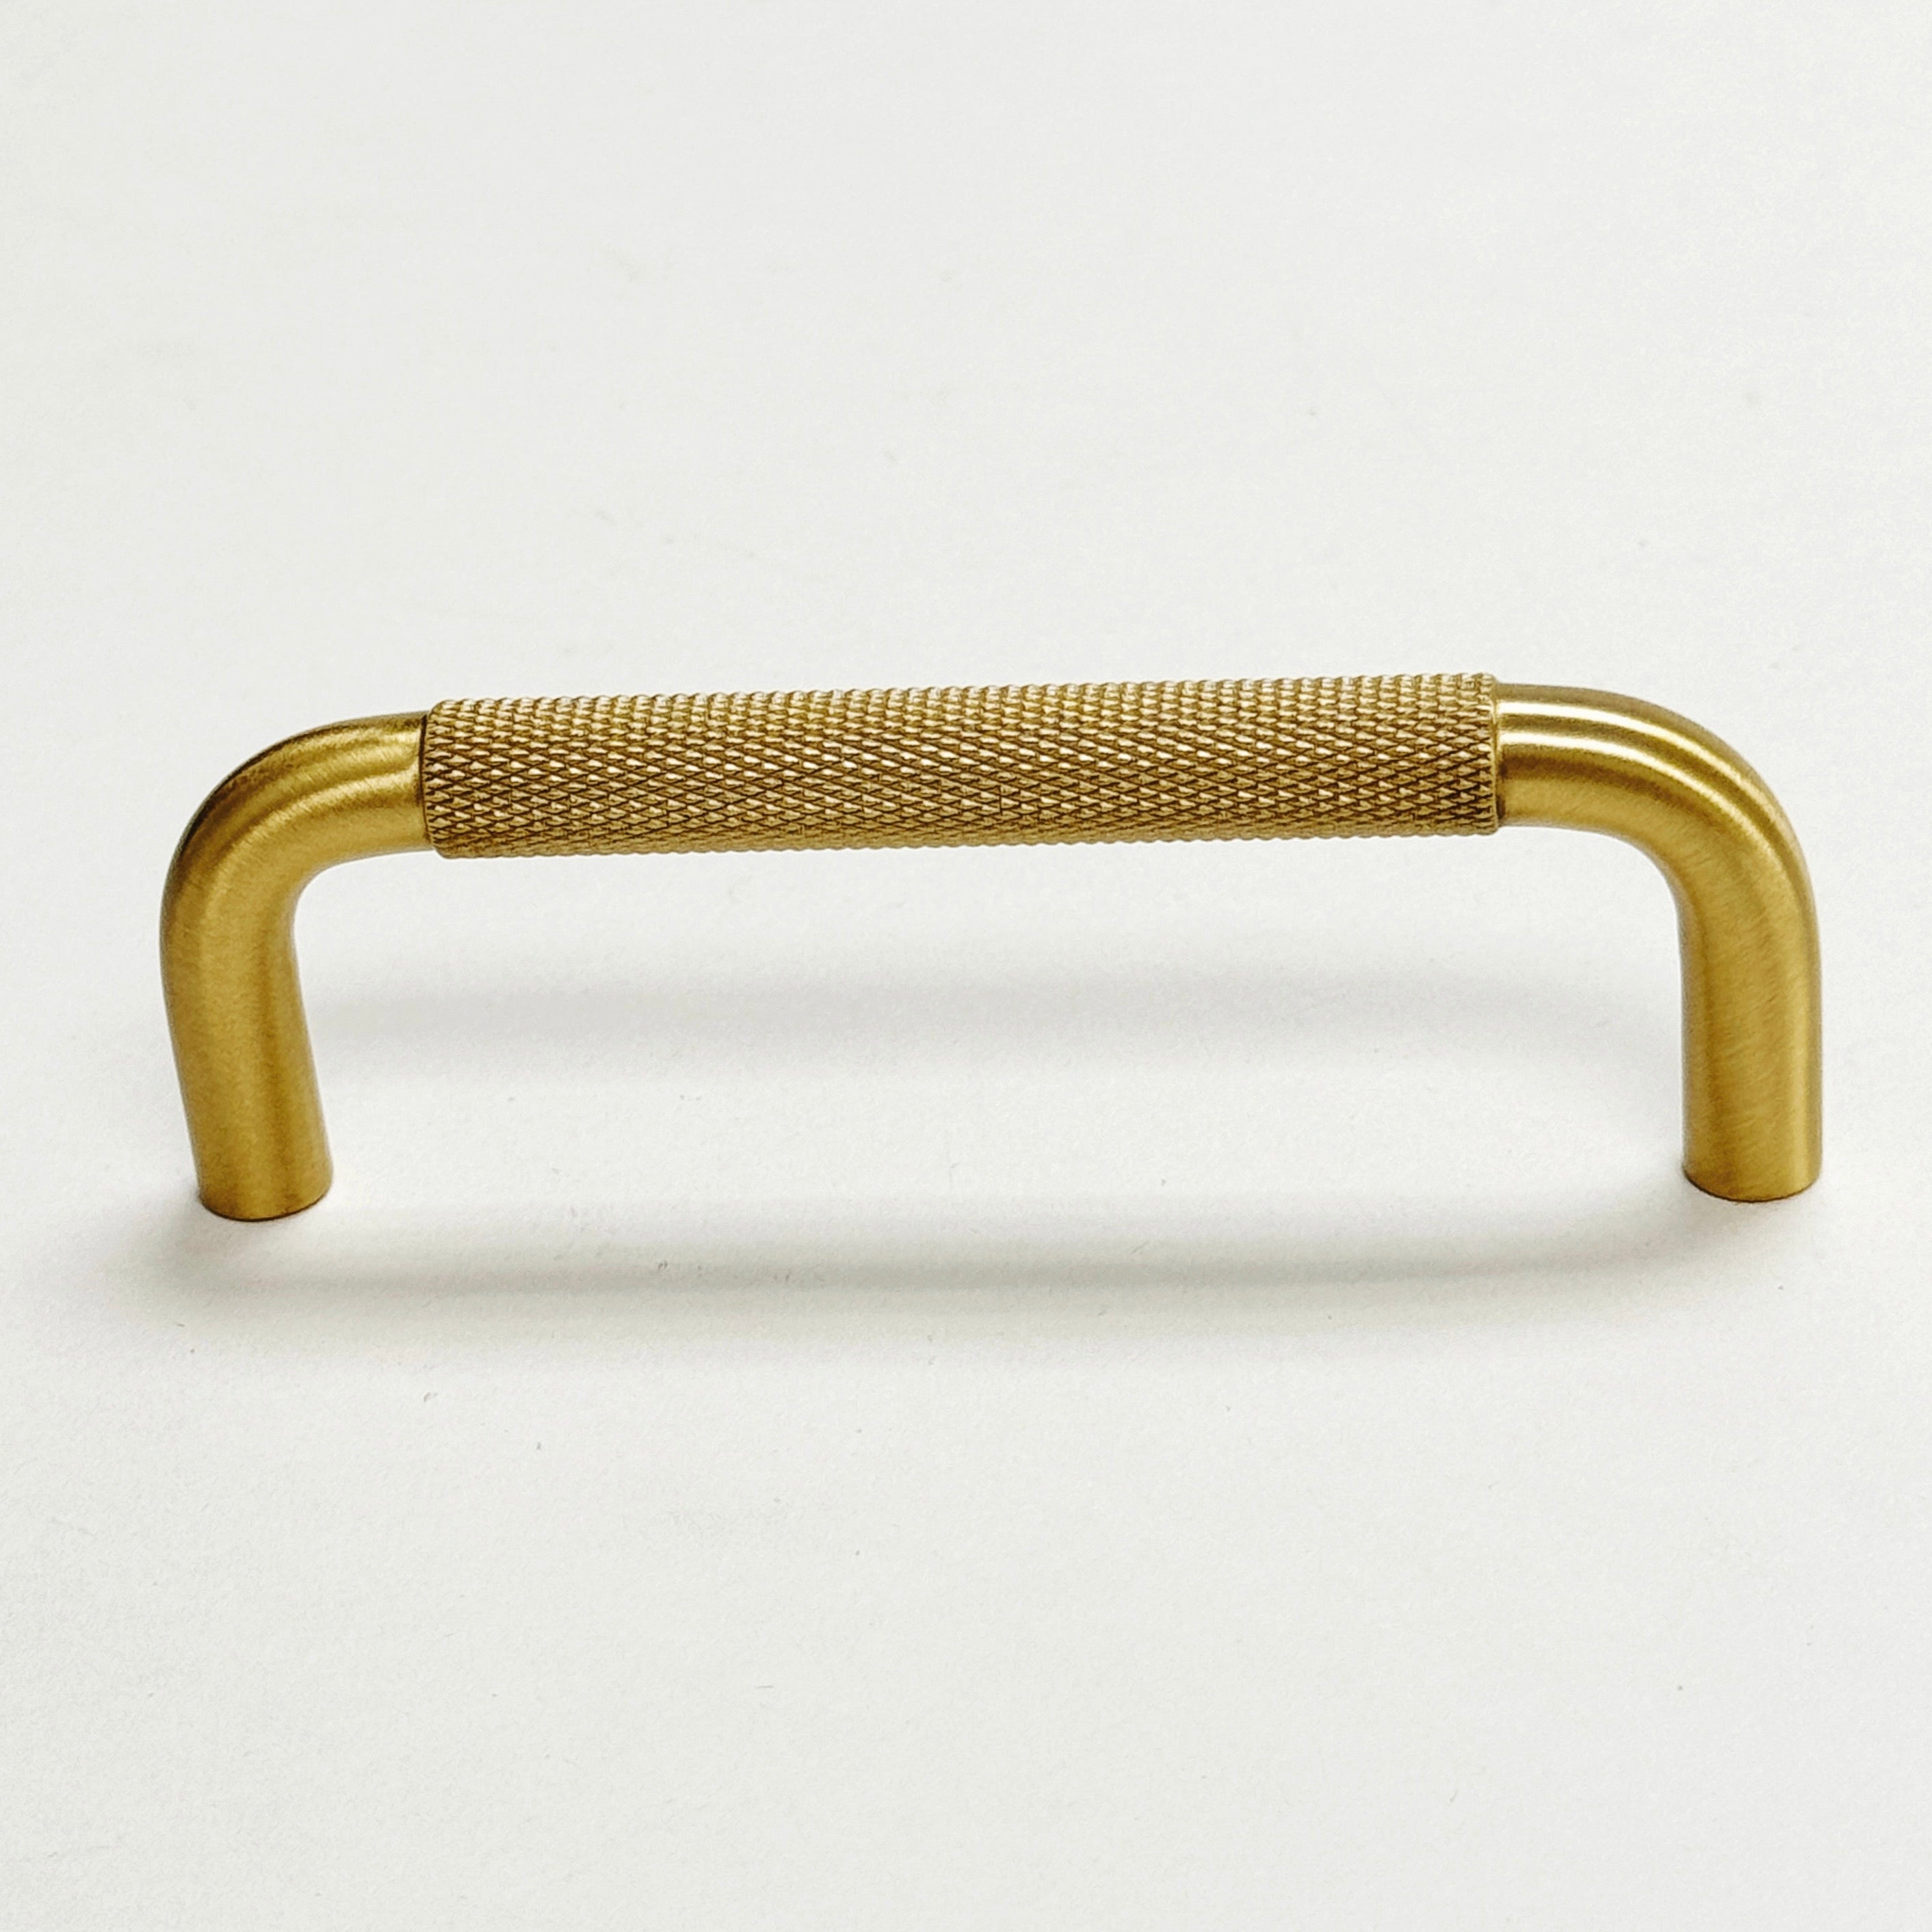 Satin Brass Knurled Wire Cabinet Knob and Drawer Pulls - Industry Hardware